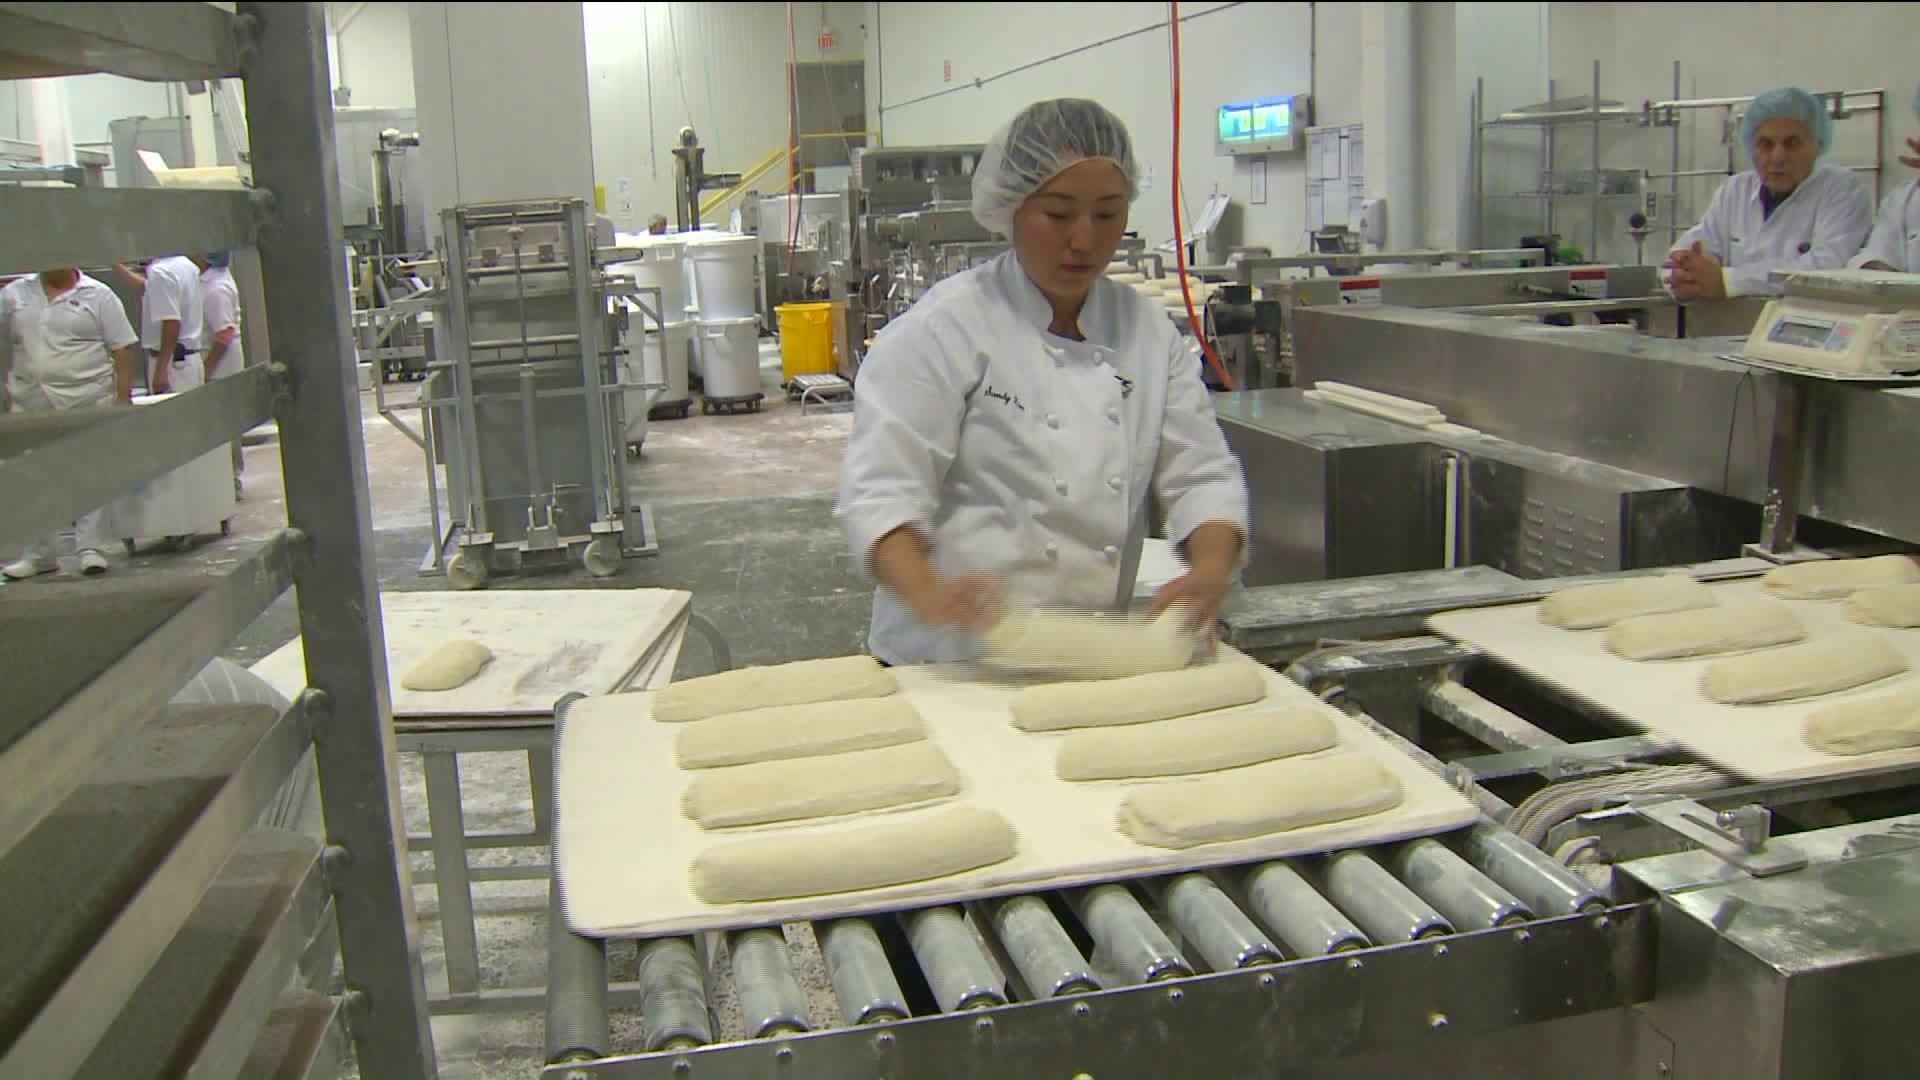 See how the bread is baked at Chabaso Bakery in New Haven